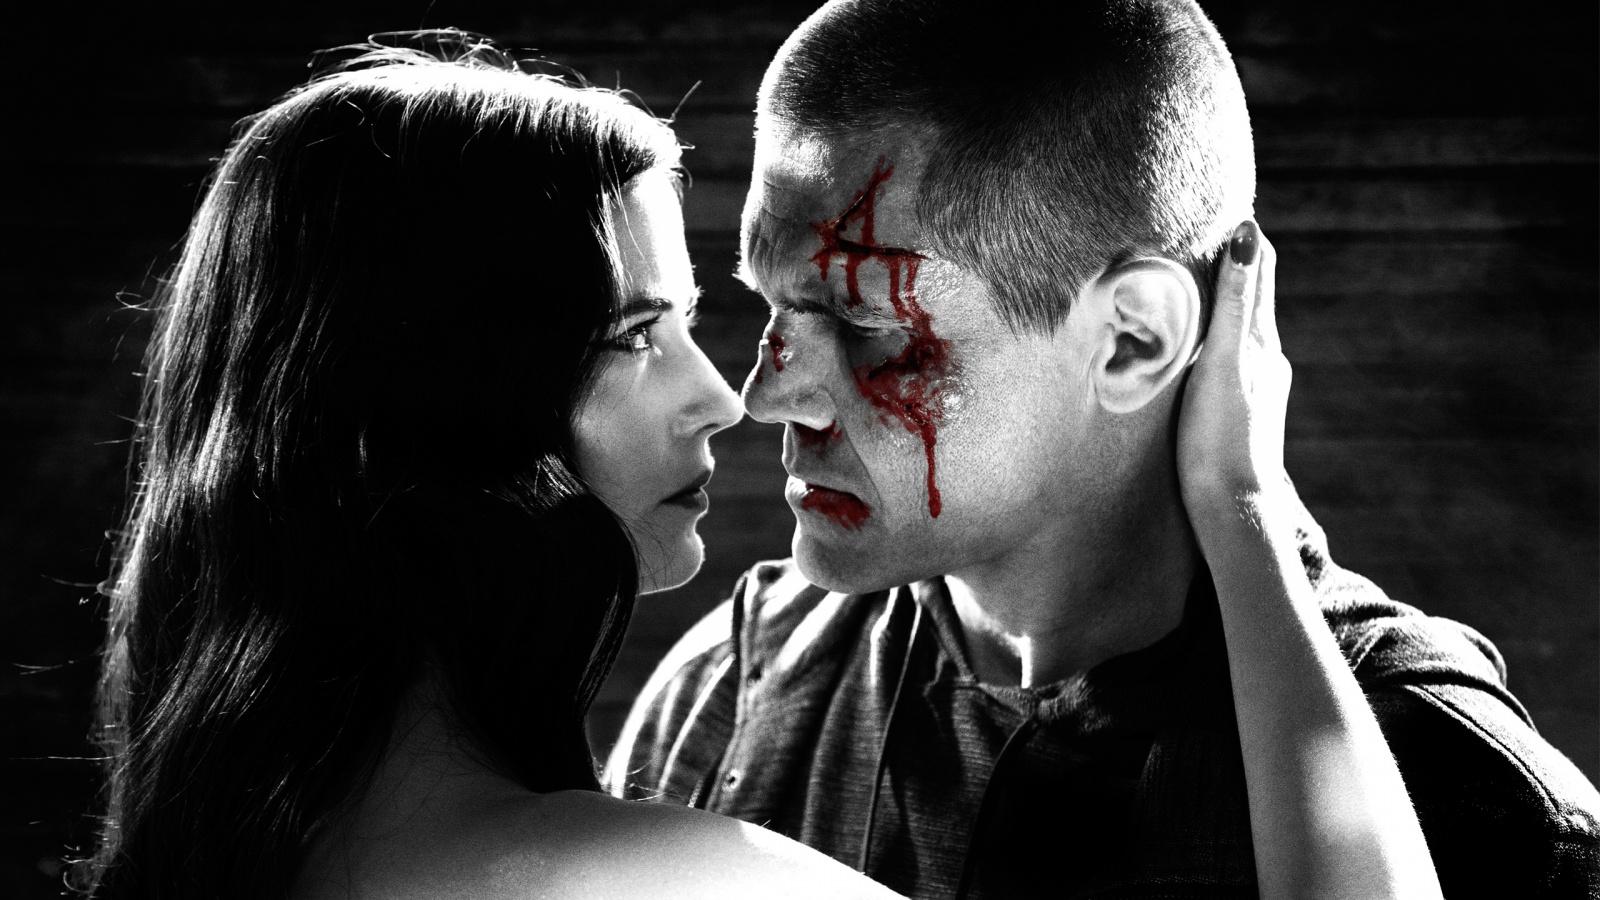 Geek insider, geekinsider, geekinsider. Com,, itunes $0. 99 rental of the week is sin city - a dame to kill for, entertainment